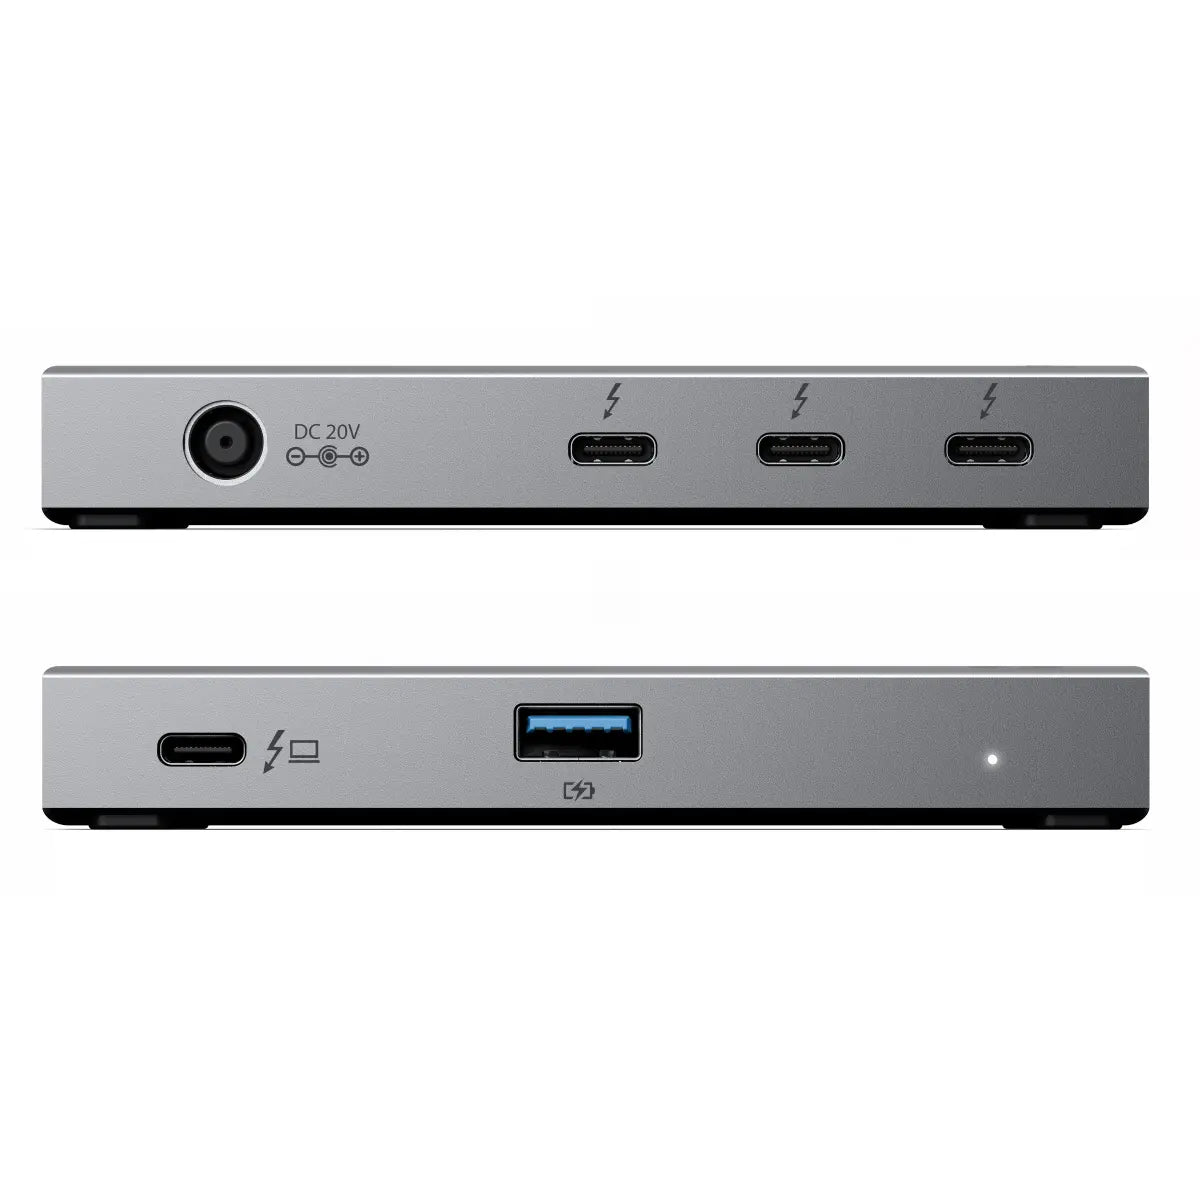 Alogic's new Thunderbolt 4 hubs deliver max speed and connections